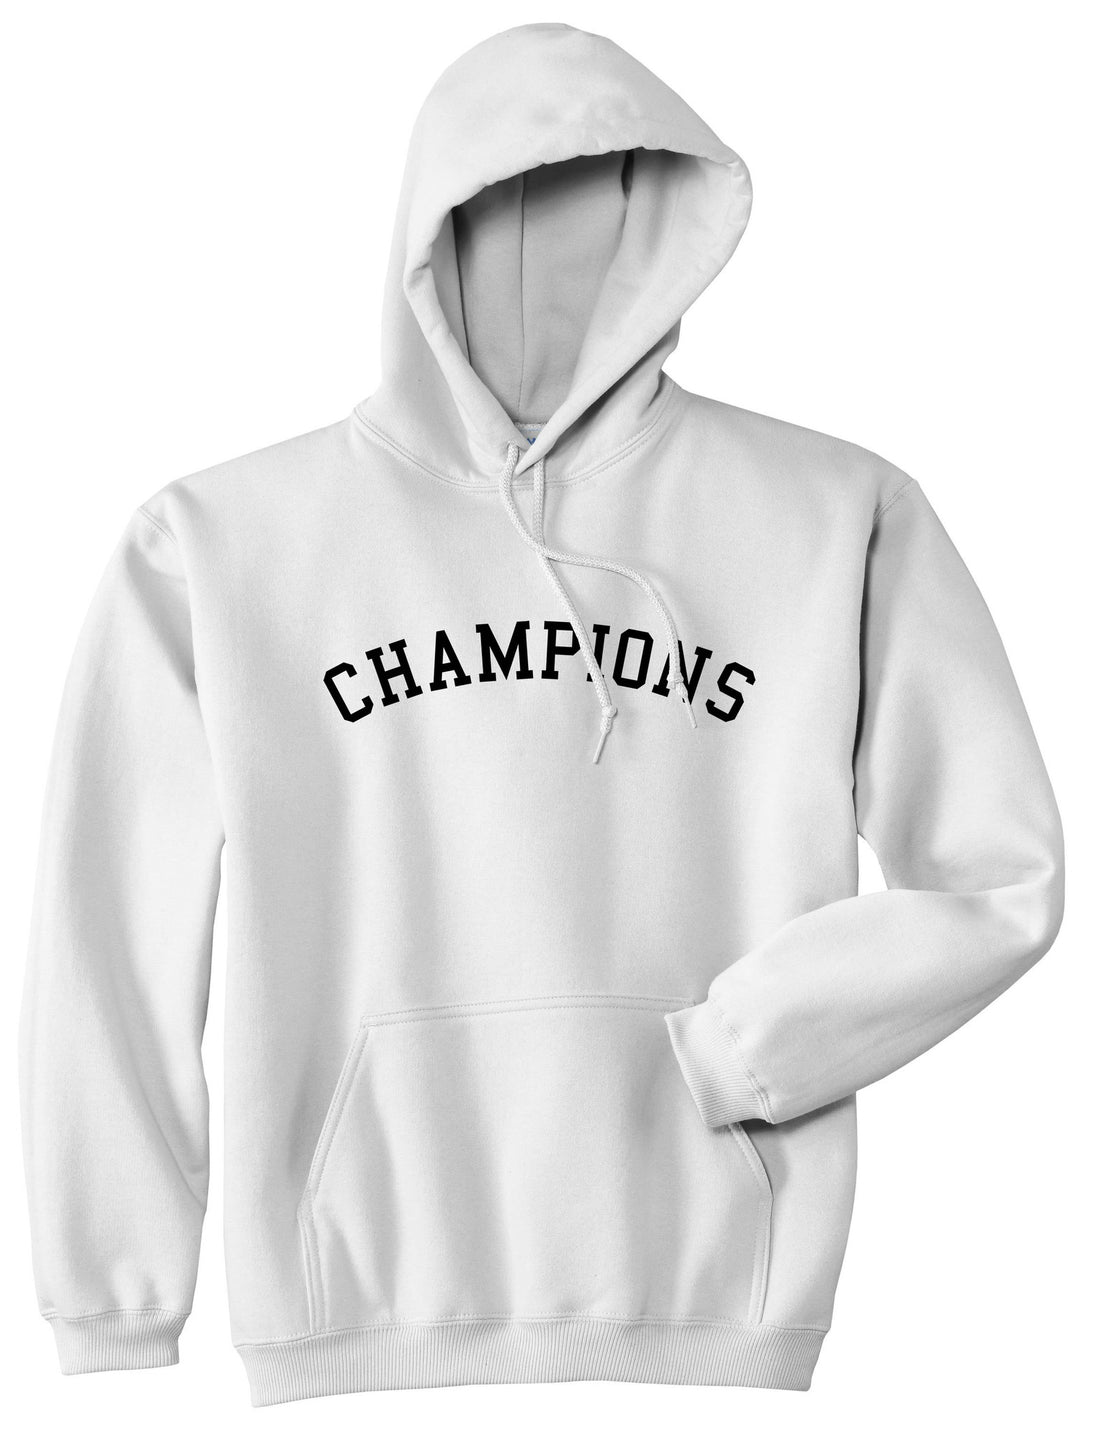 Champions Boys Kids Pullover Hoodie Hoody in White by Kings Of NY